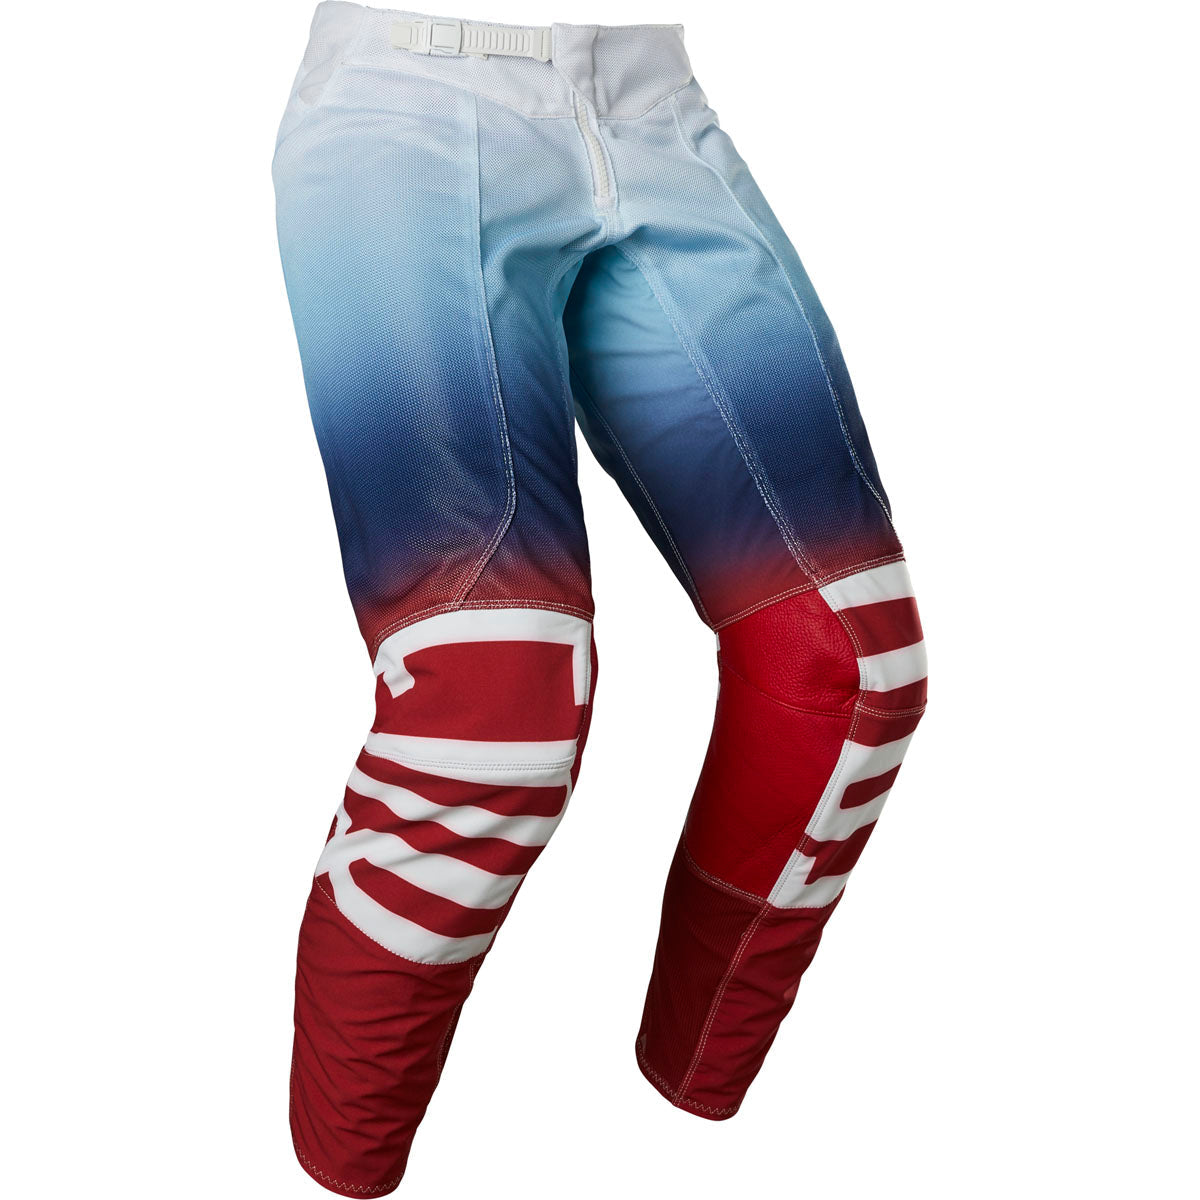 Fox Racing Airline Reepz Pants - White/Red/Blue